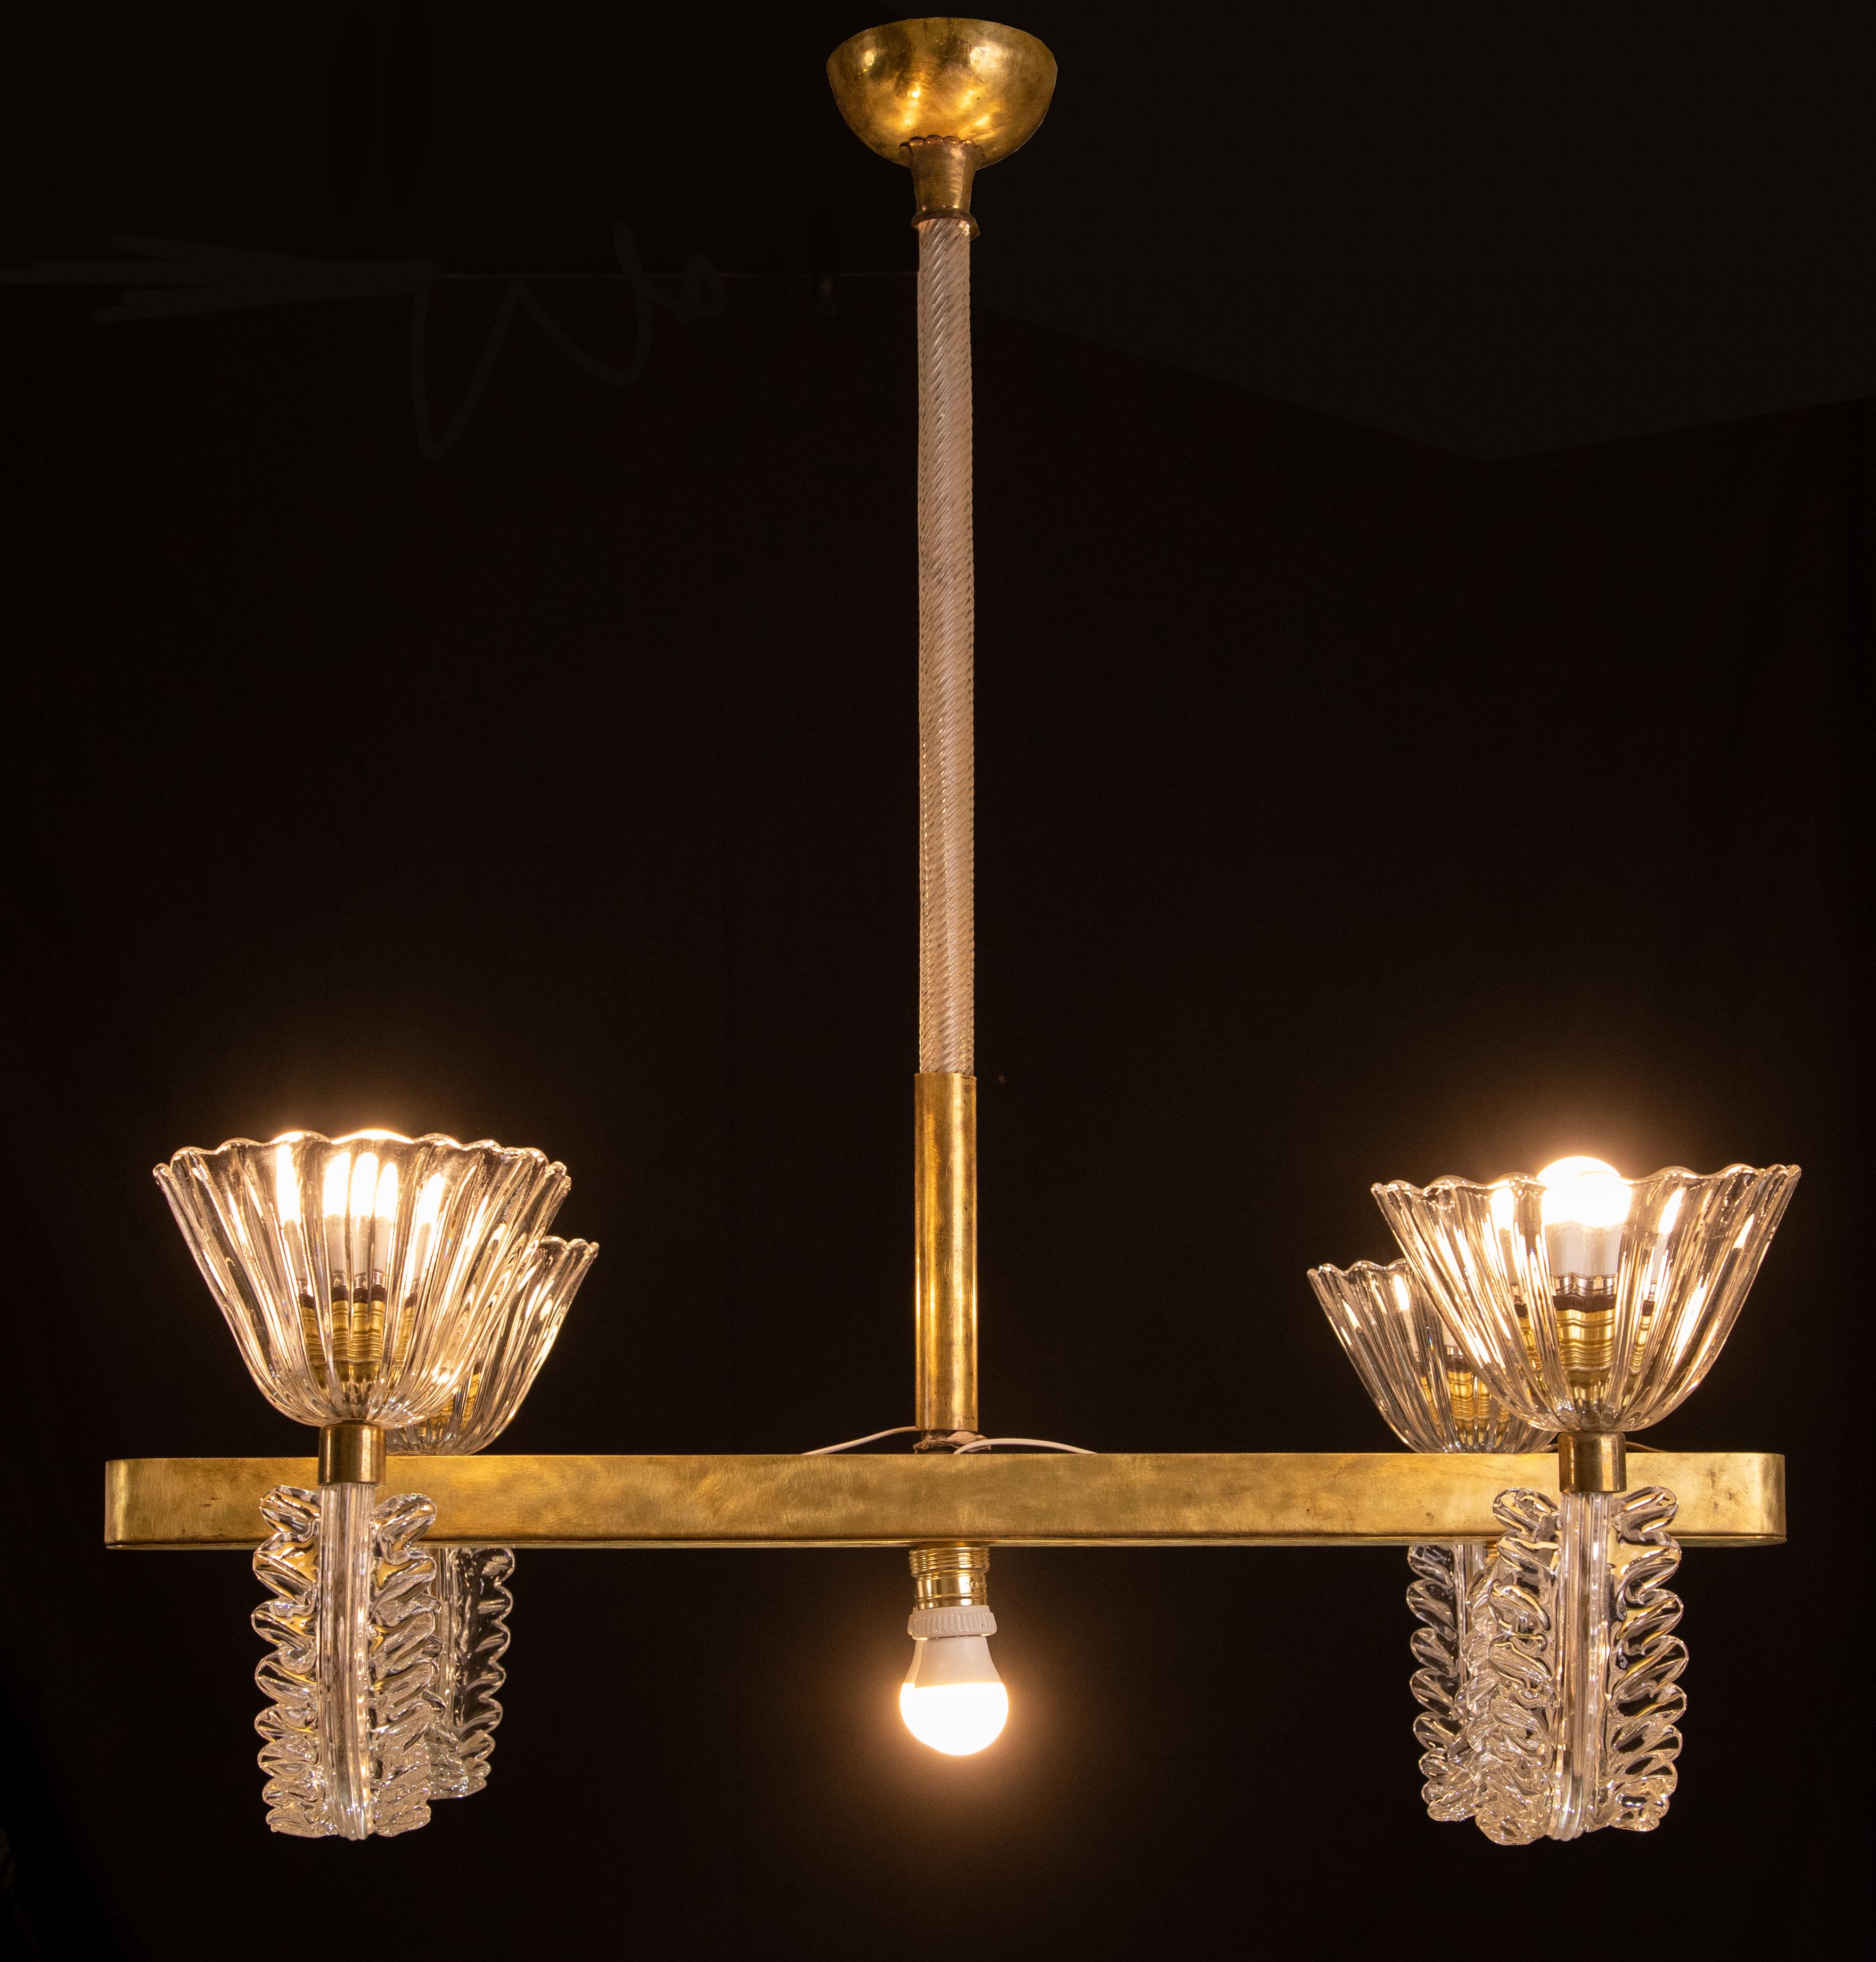 Extraordinary Murano chandelier from the Barovier and Toso glassworks.

Period circa 1950.

The chandelier consists of a central brass axis, fully restored to polished finish to which 4 arms with cups are attached.

Two other lights are mounted